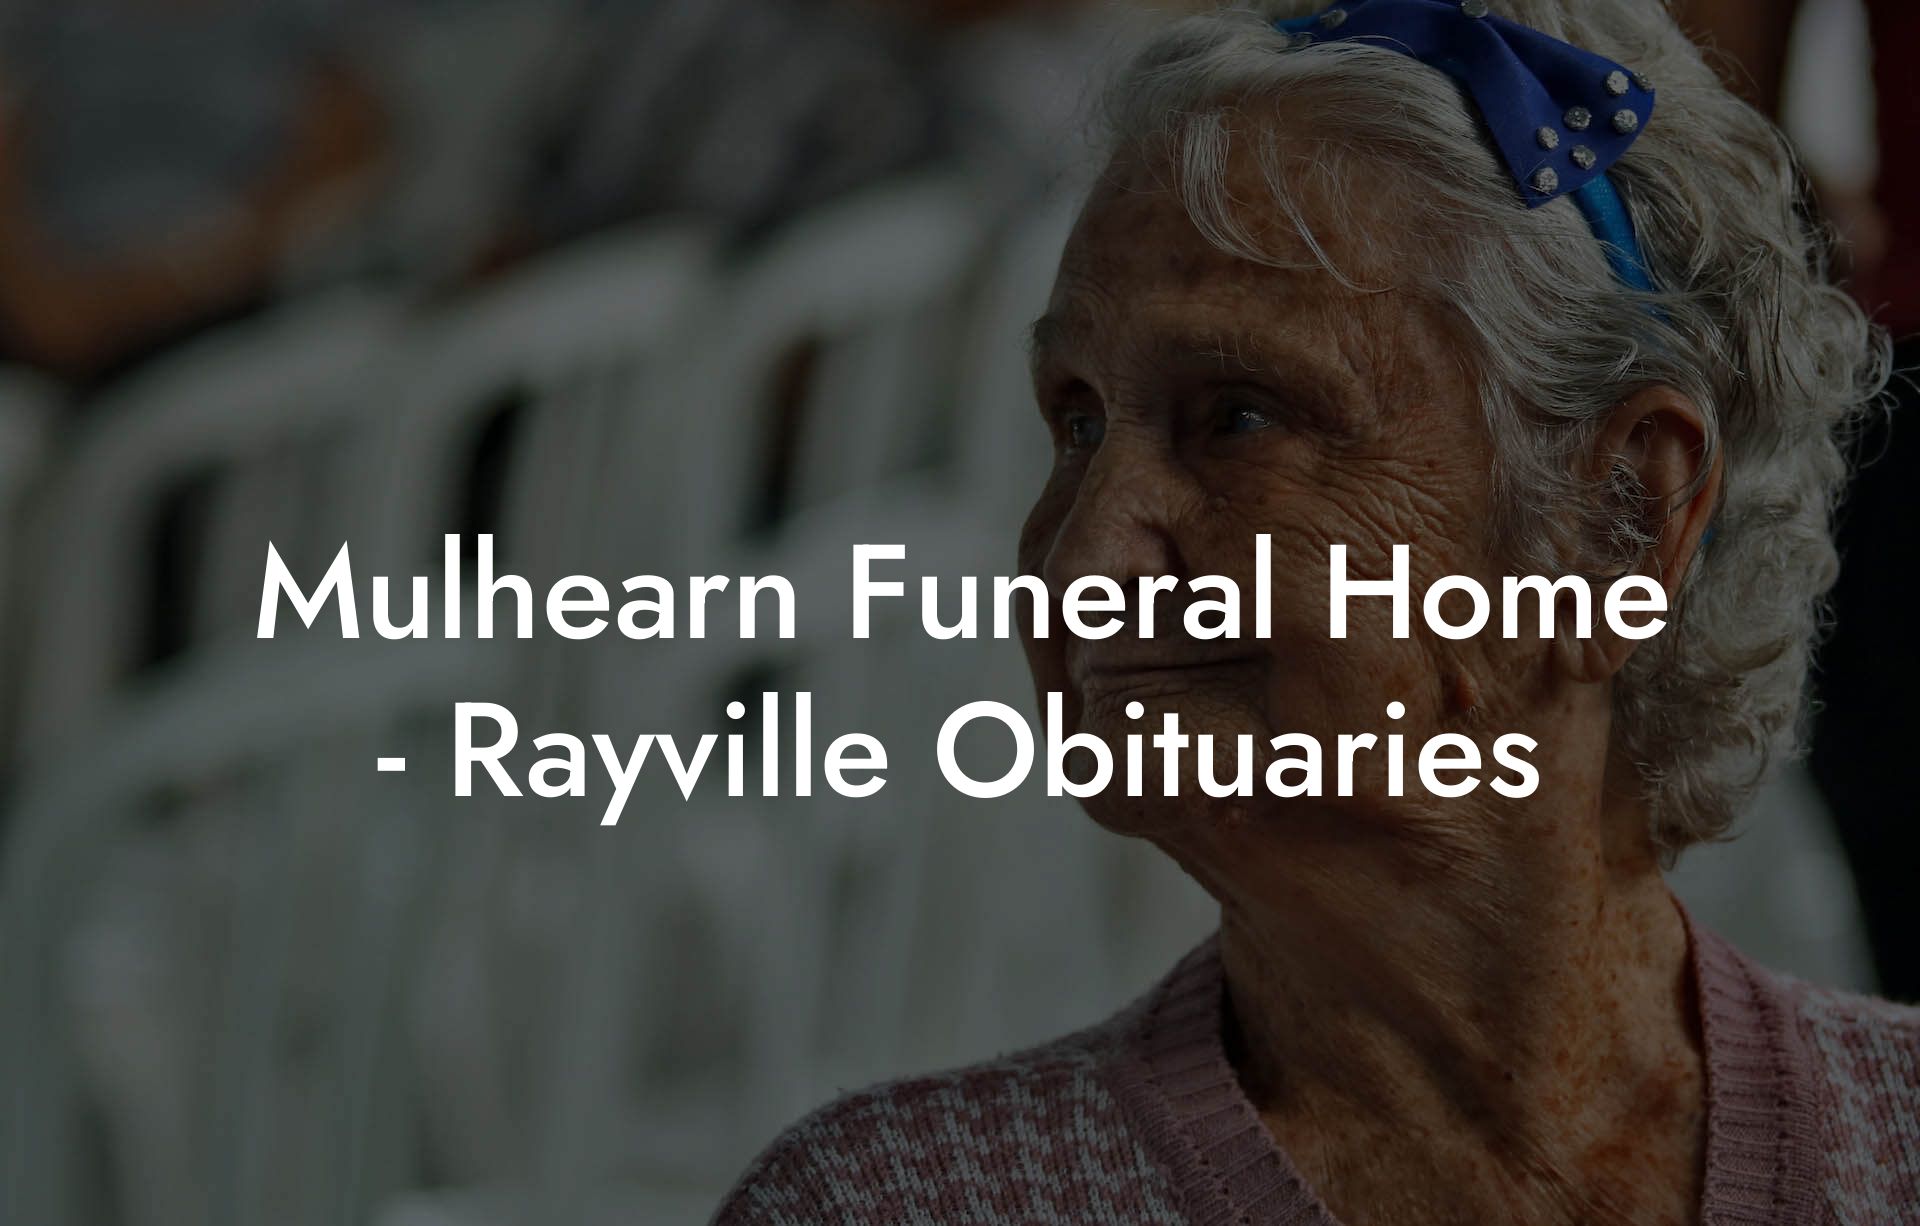 Mulhearn Funeral Home - Rayville Obituaries